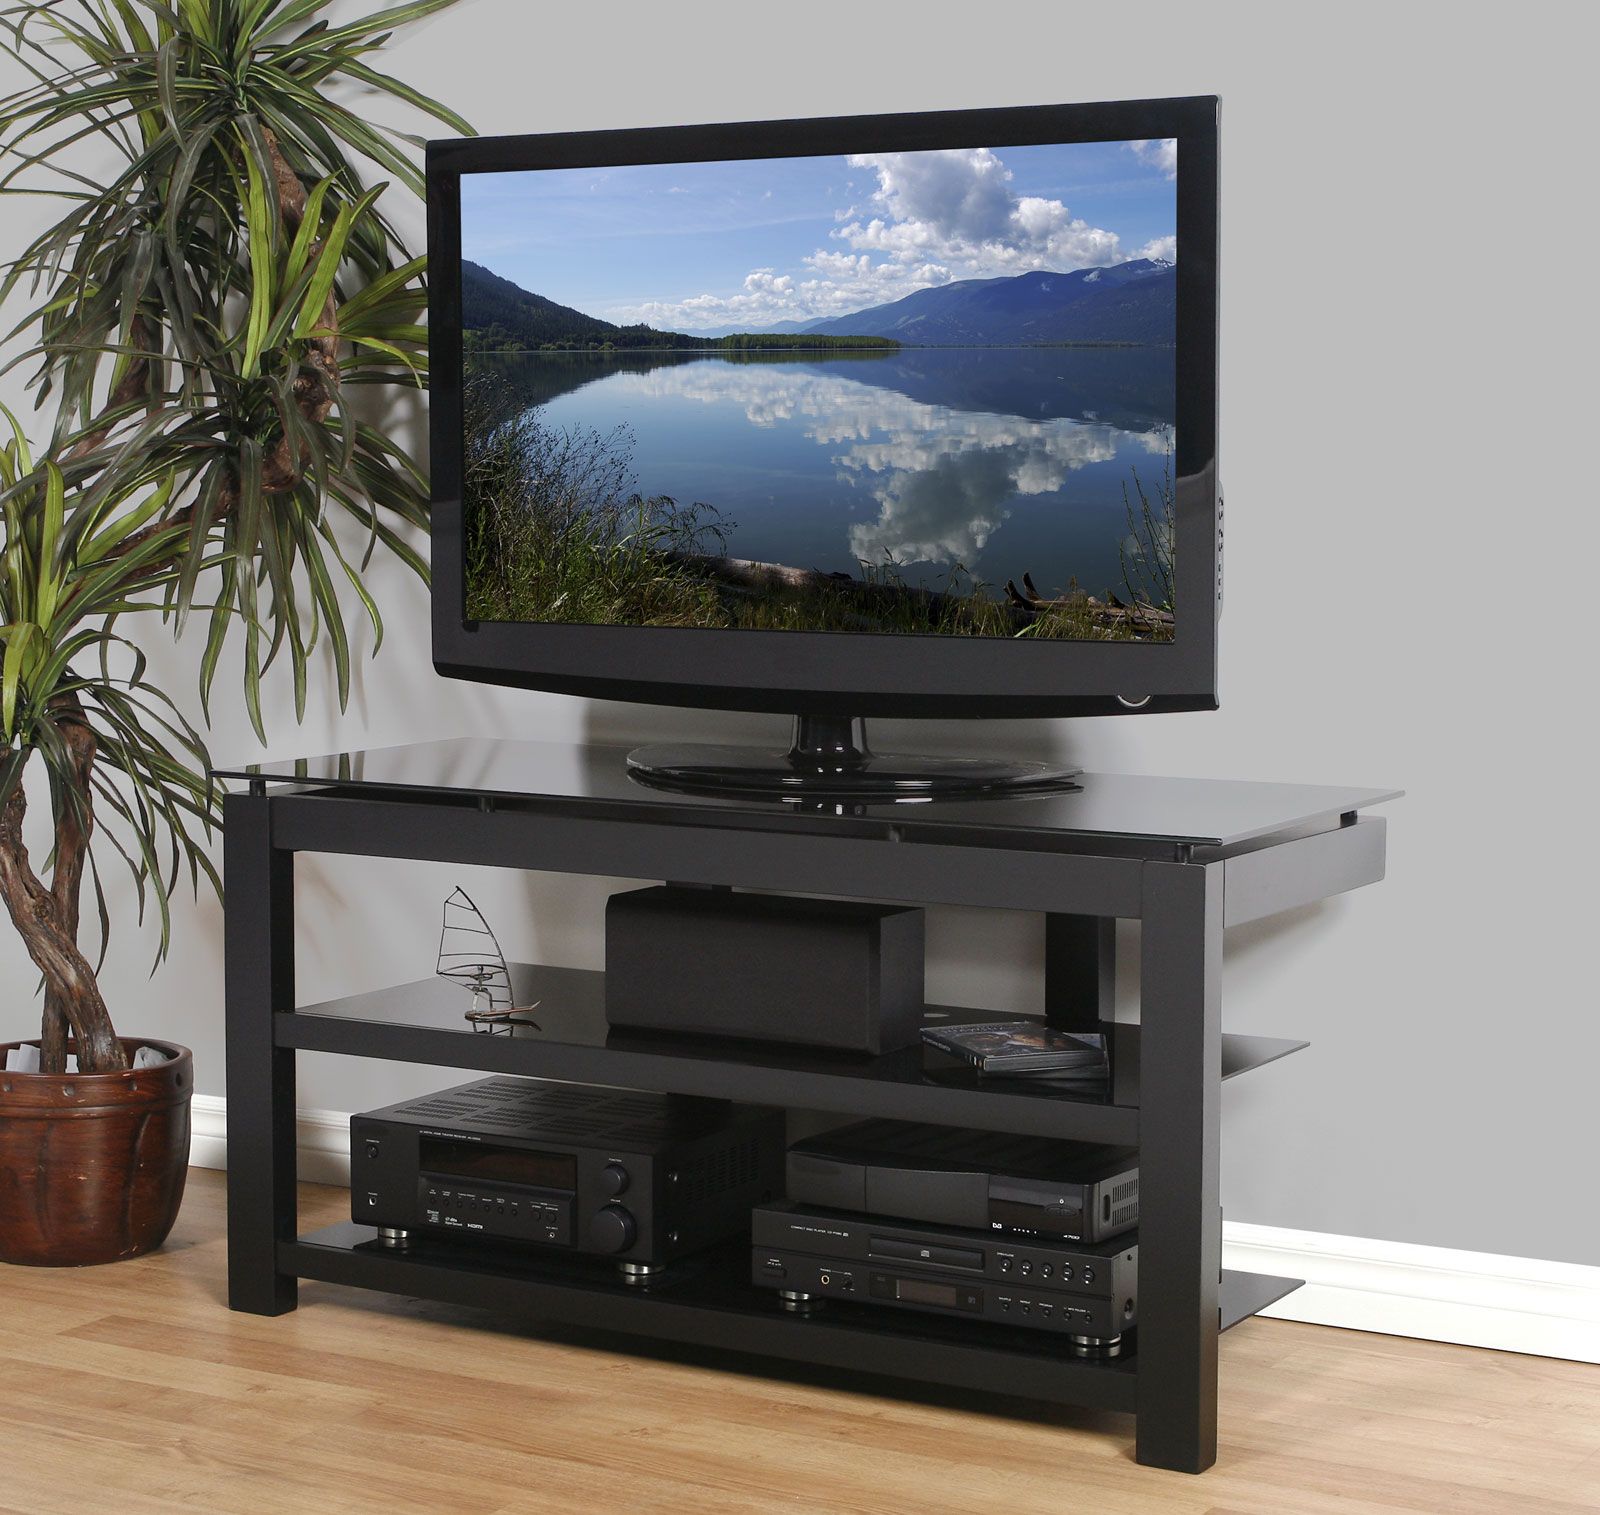 50 Inch Flat Screen Tv Stand – Natural Wood Veneers And Inside Tv Stands For 50 Inch Tvs (View 5 of 15)